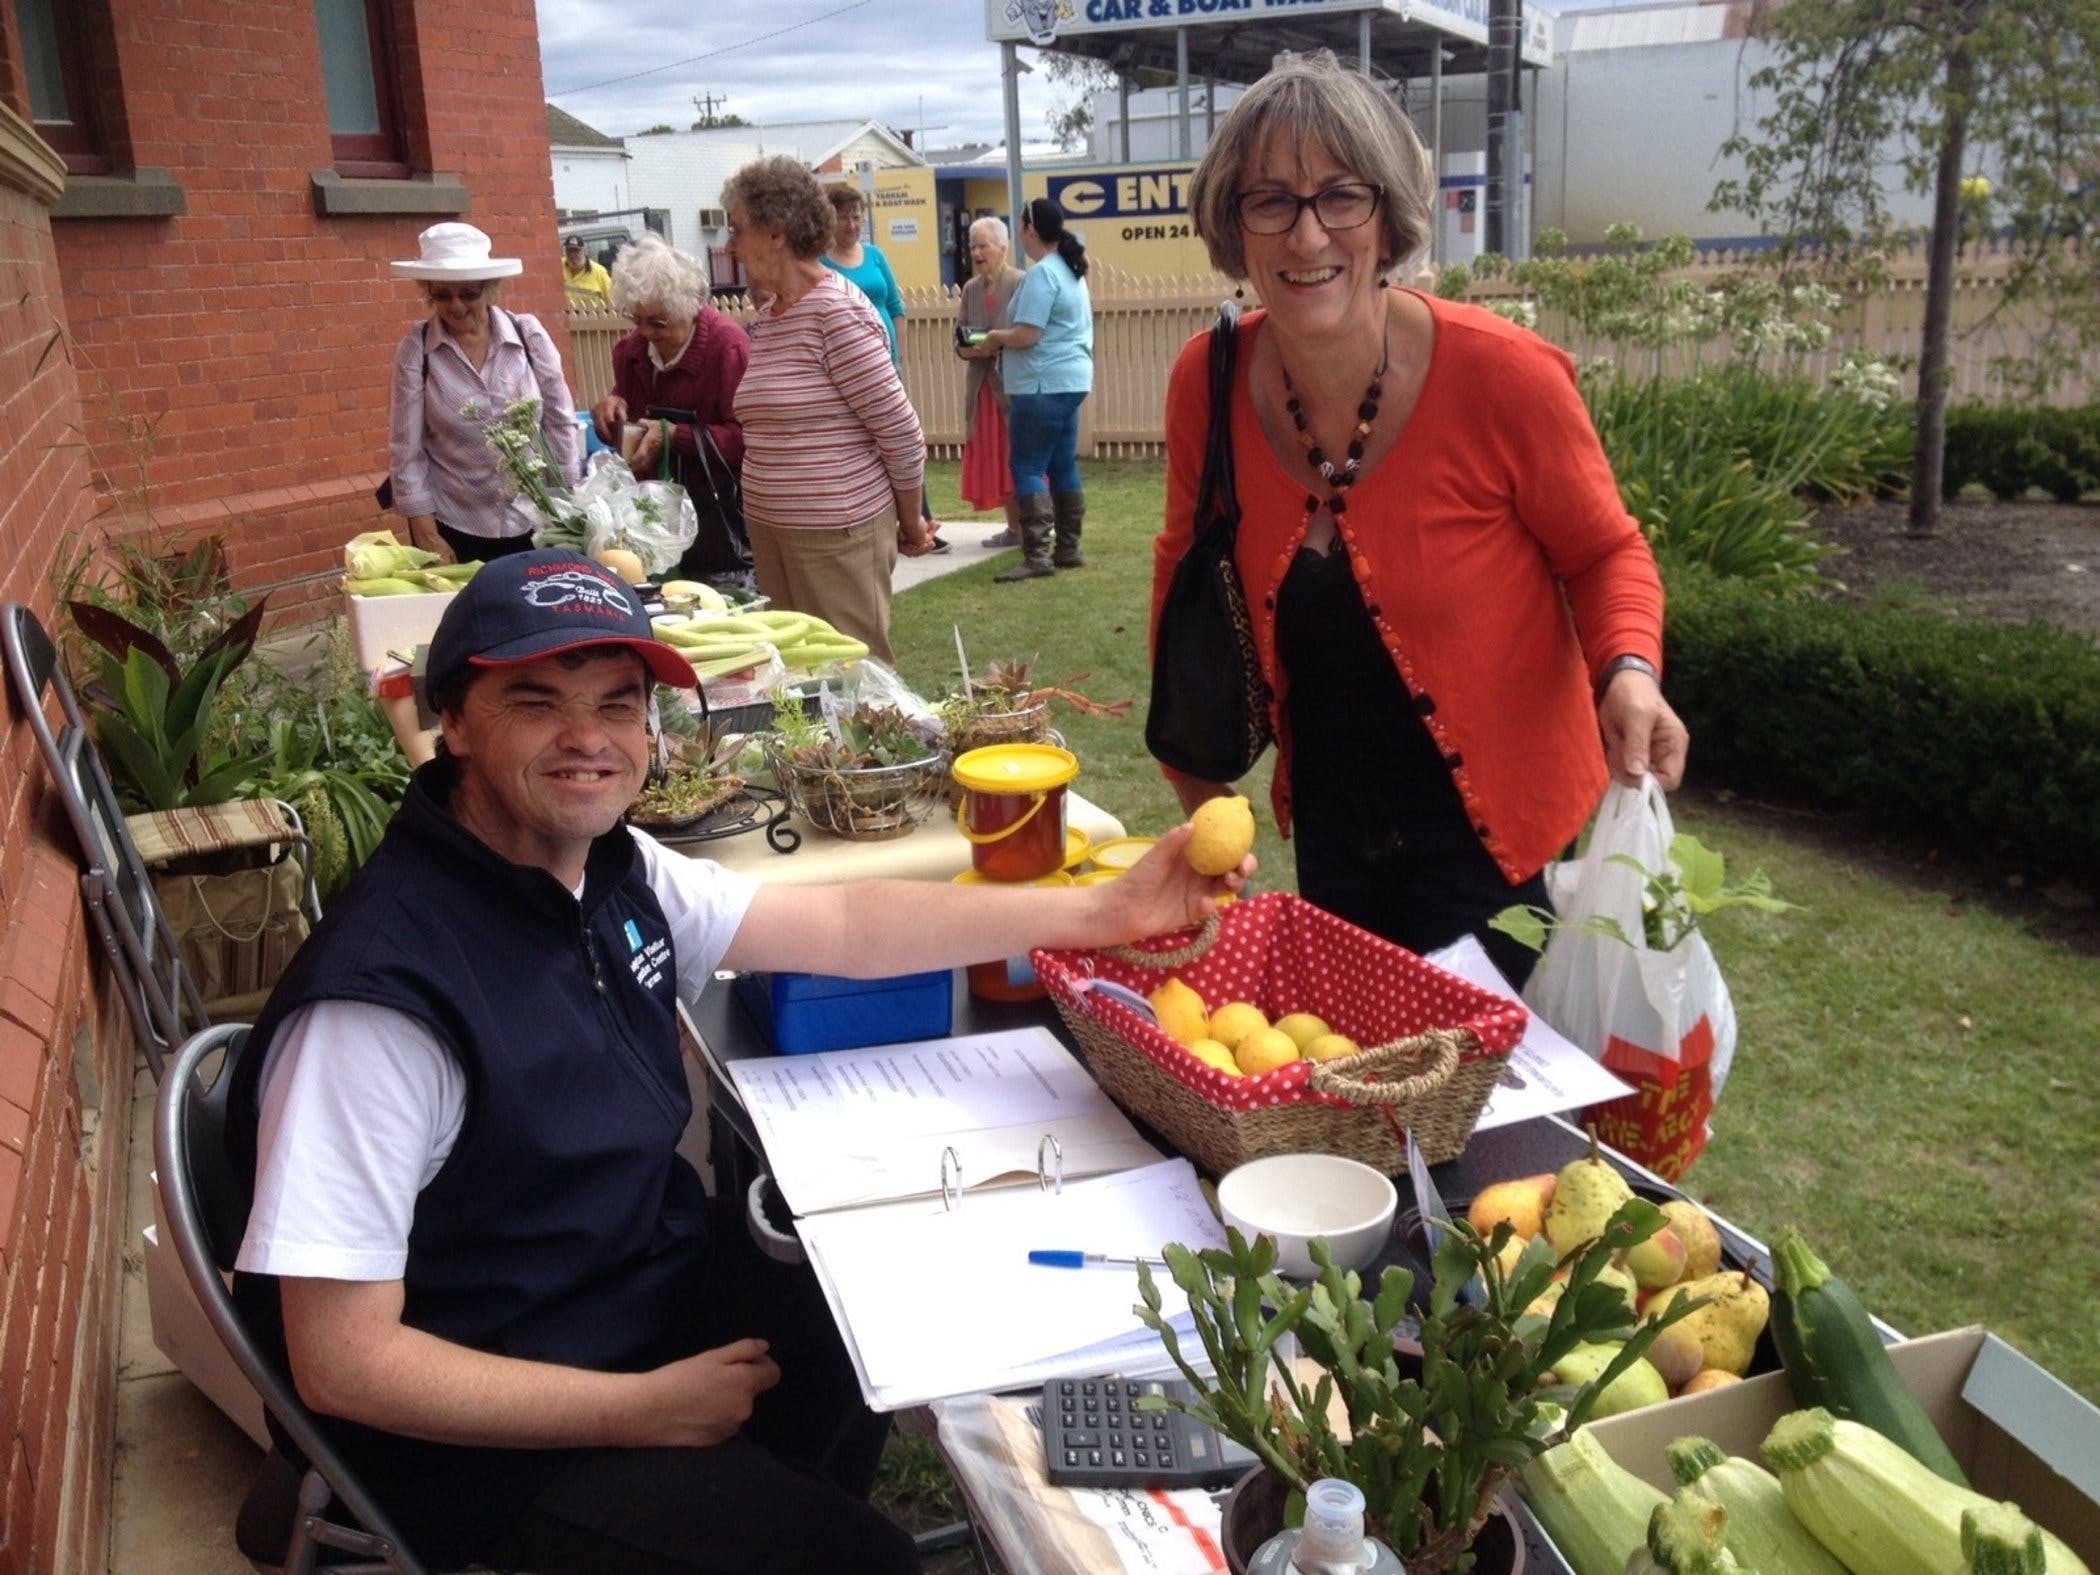 Yarram Courthouse Garden Produce Market - Pubs and Clubs